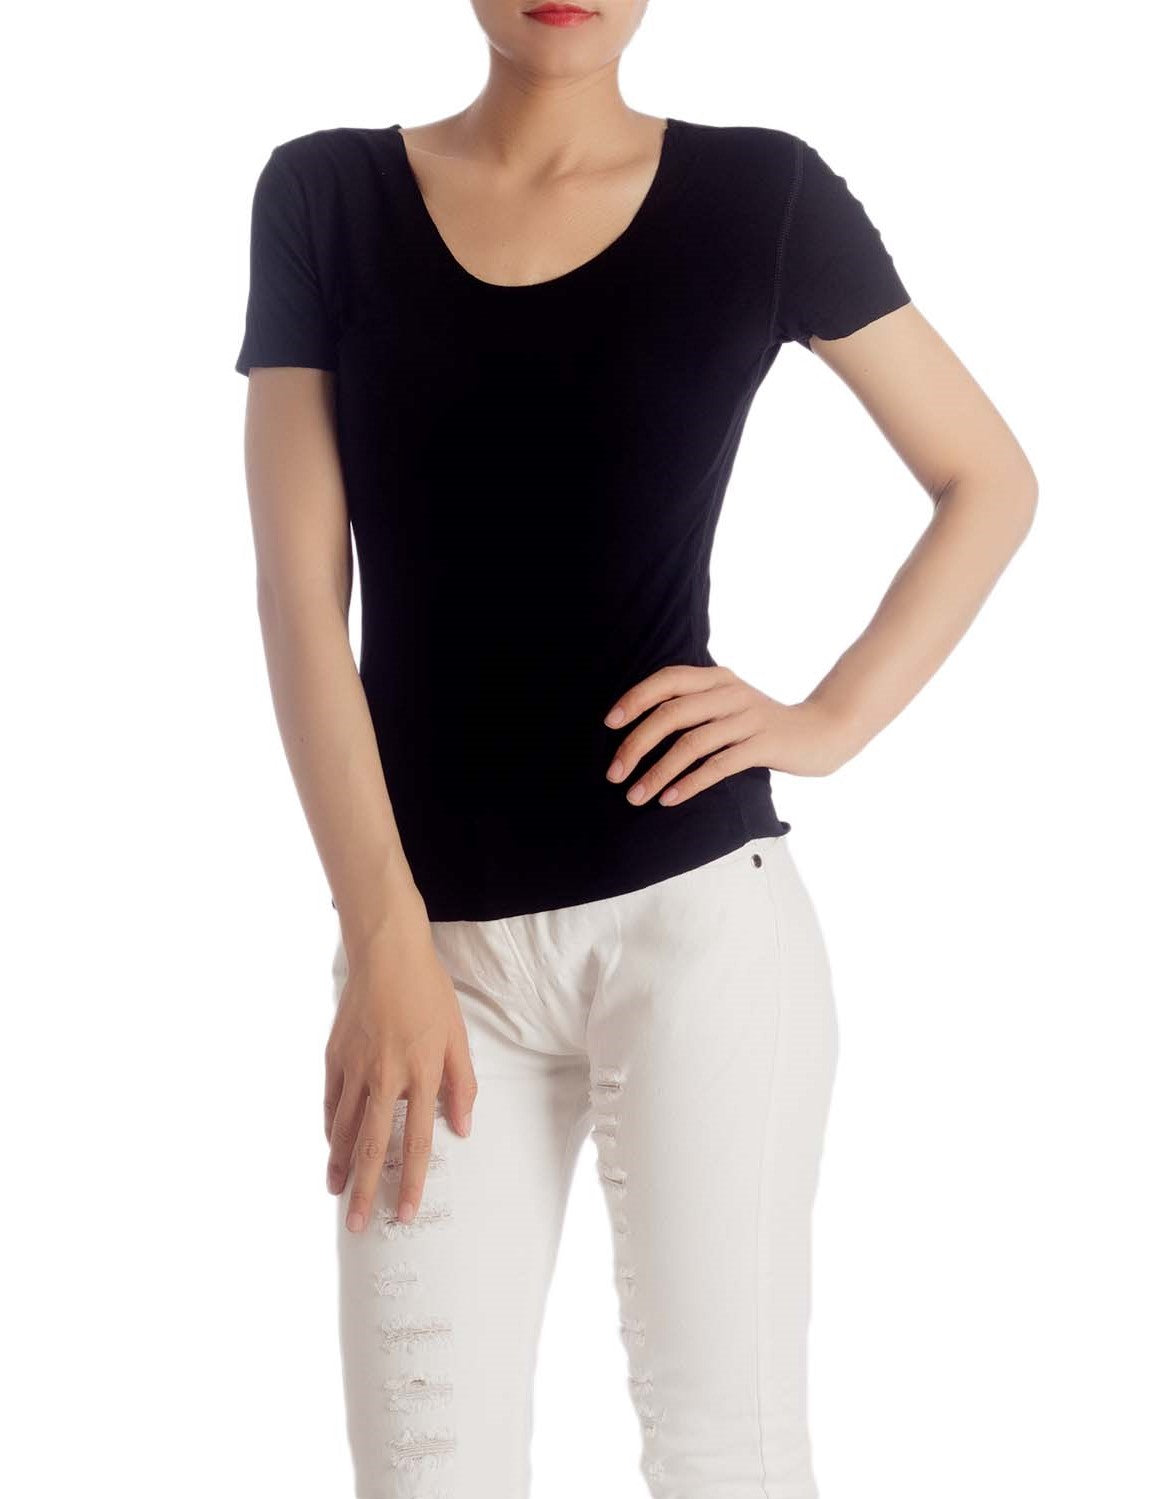 Women's Lightweight Tshirts Stretchy Solid Color T-shirt Fashion Knit Tees